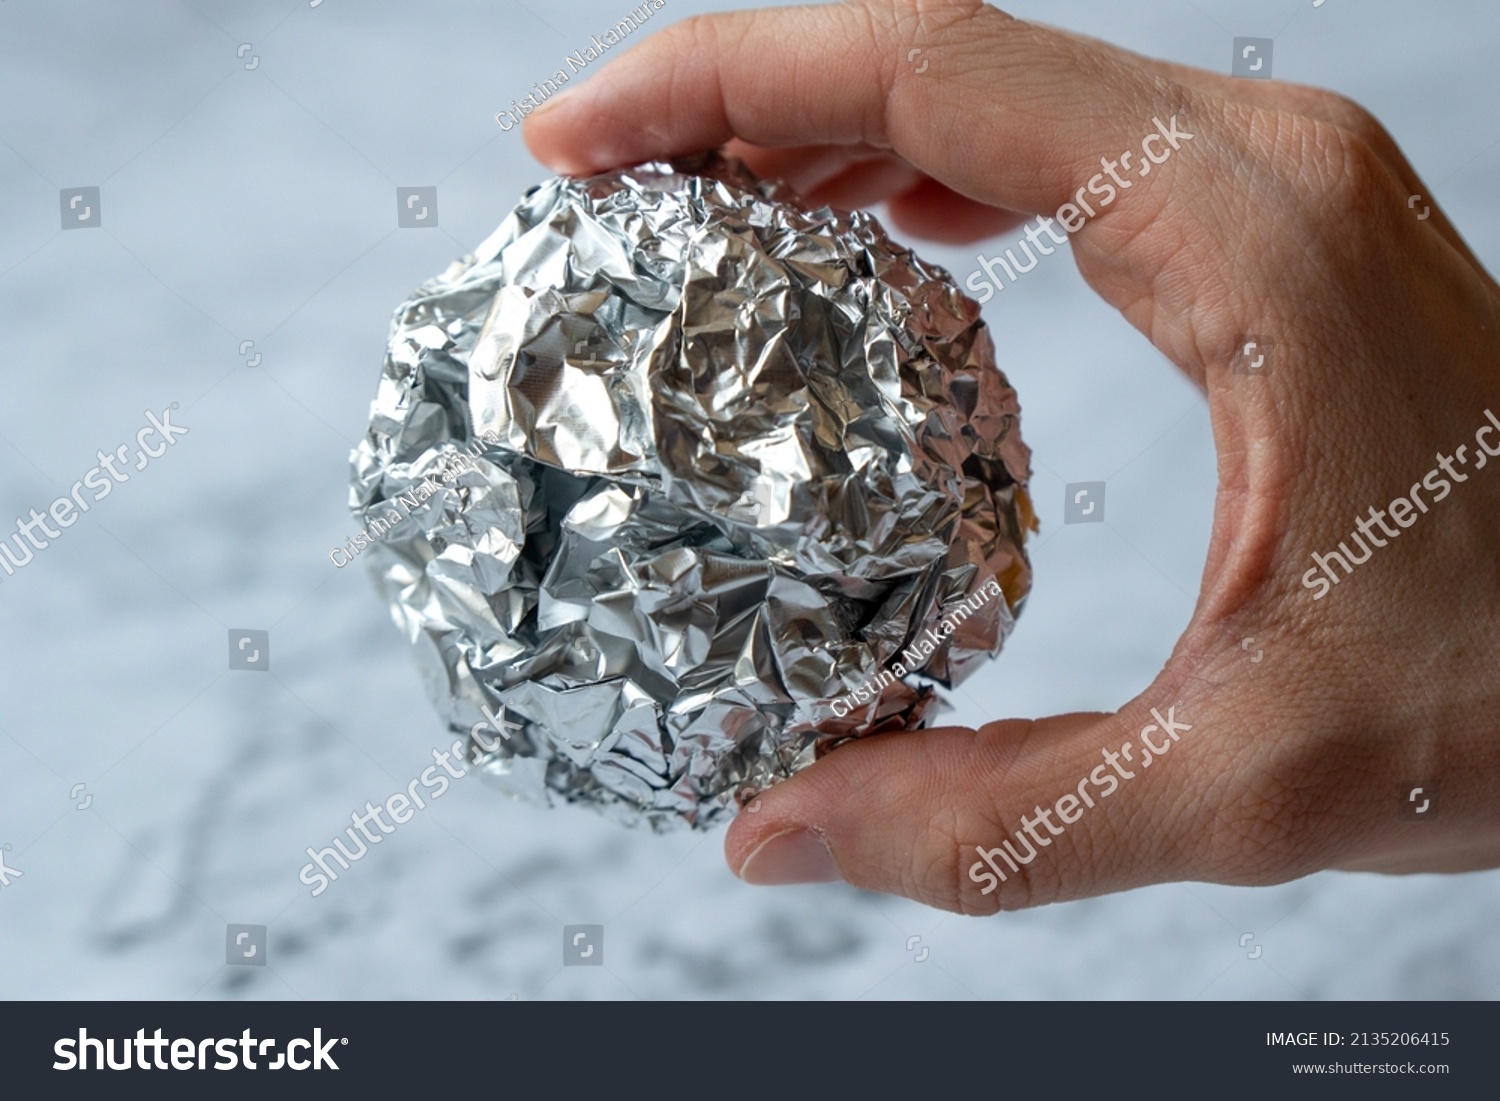 Wrinkled ball of aluminium foil, a material often used in the kitchen. #2135206415